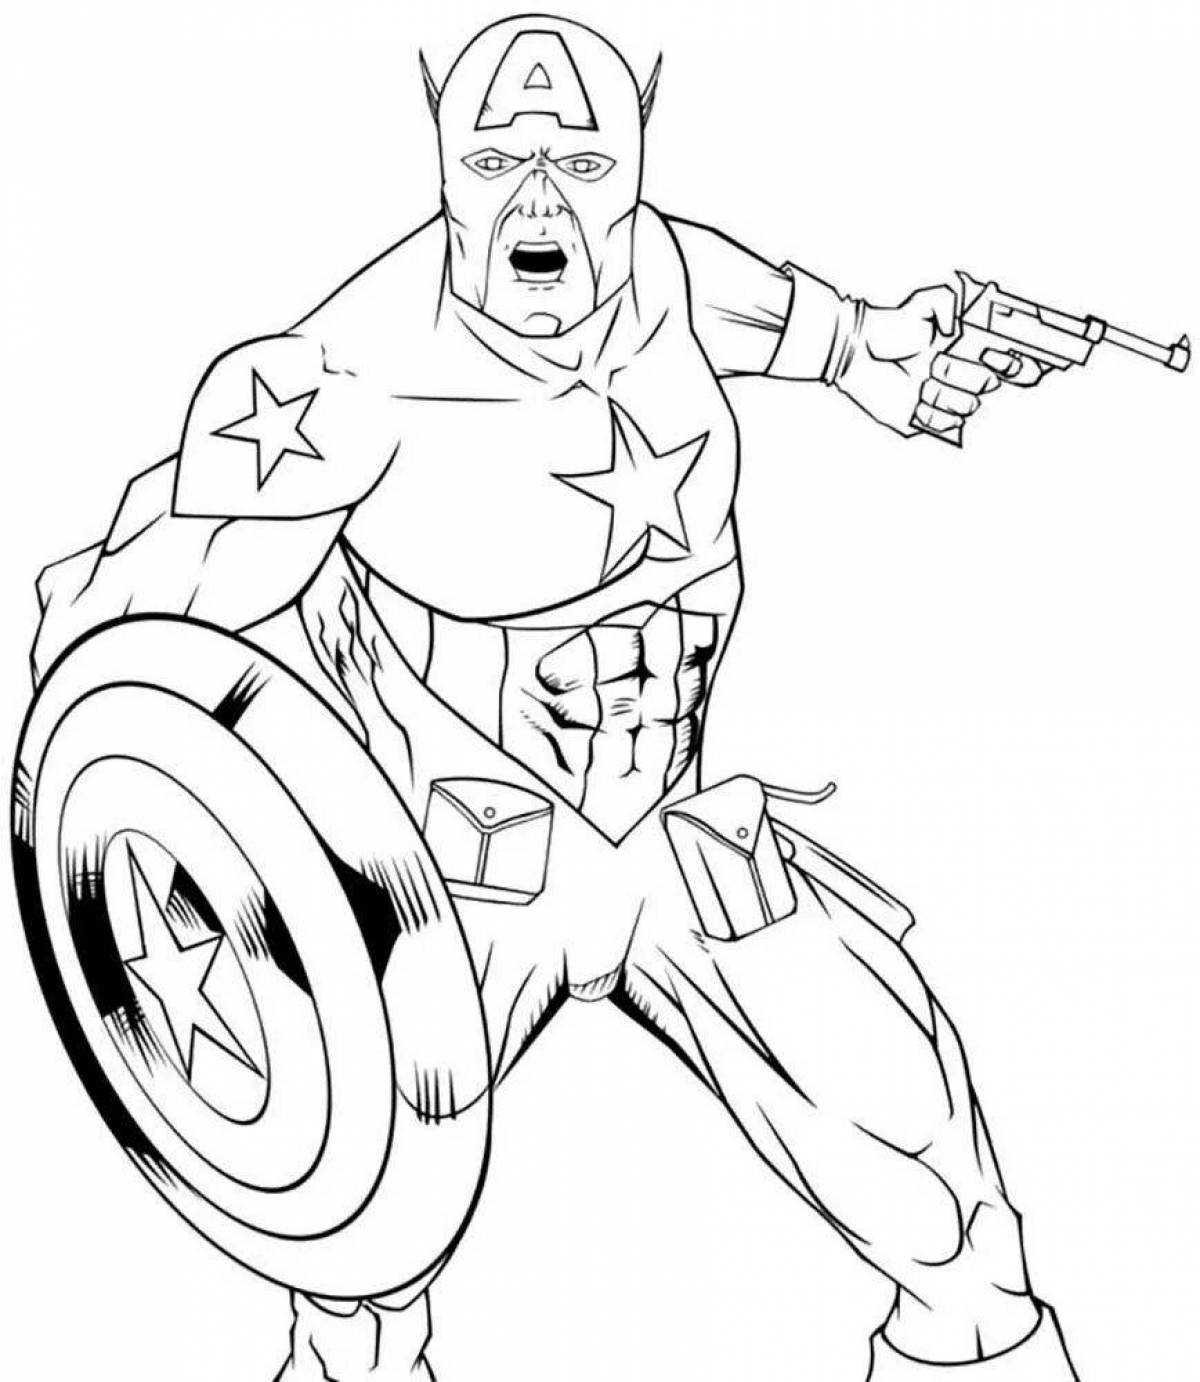 Exquisite captain america coloring book for boys